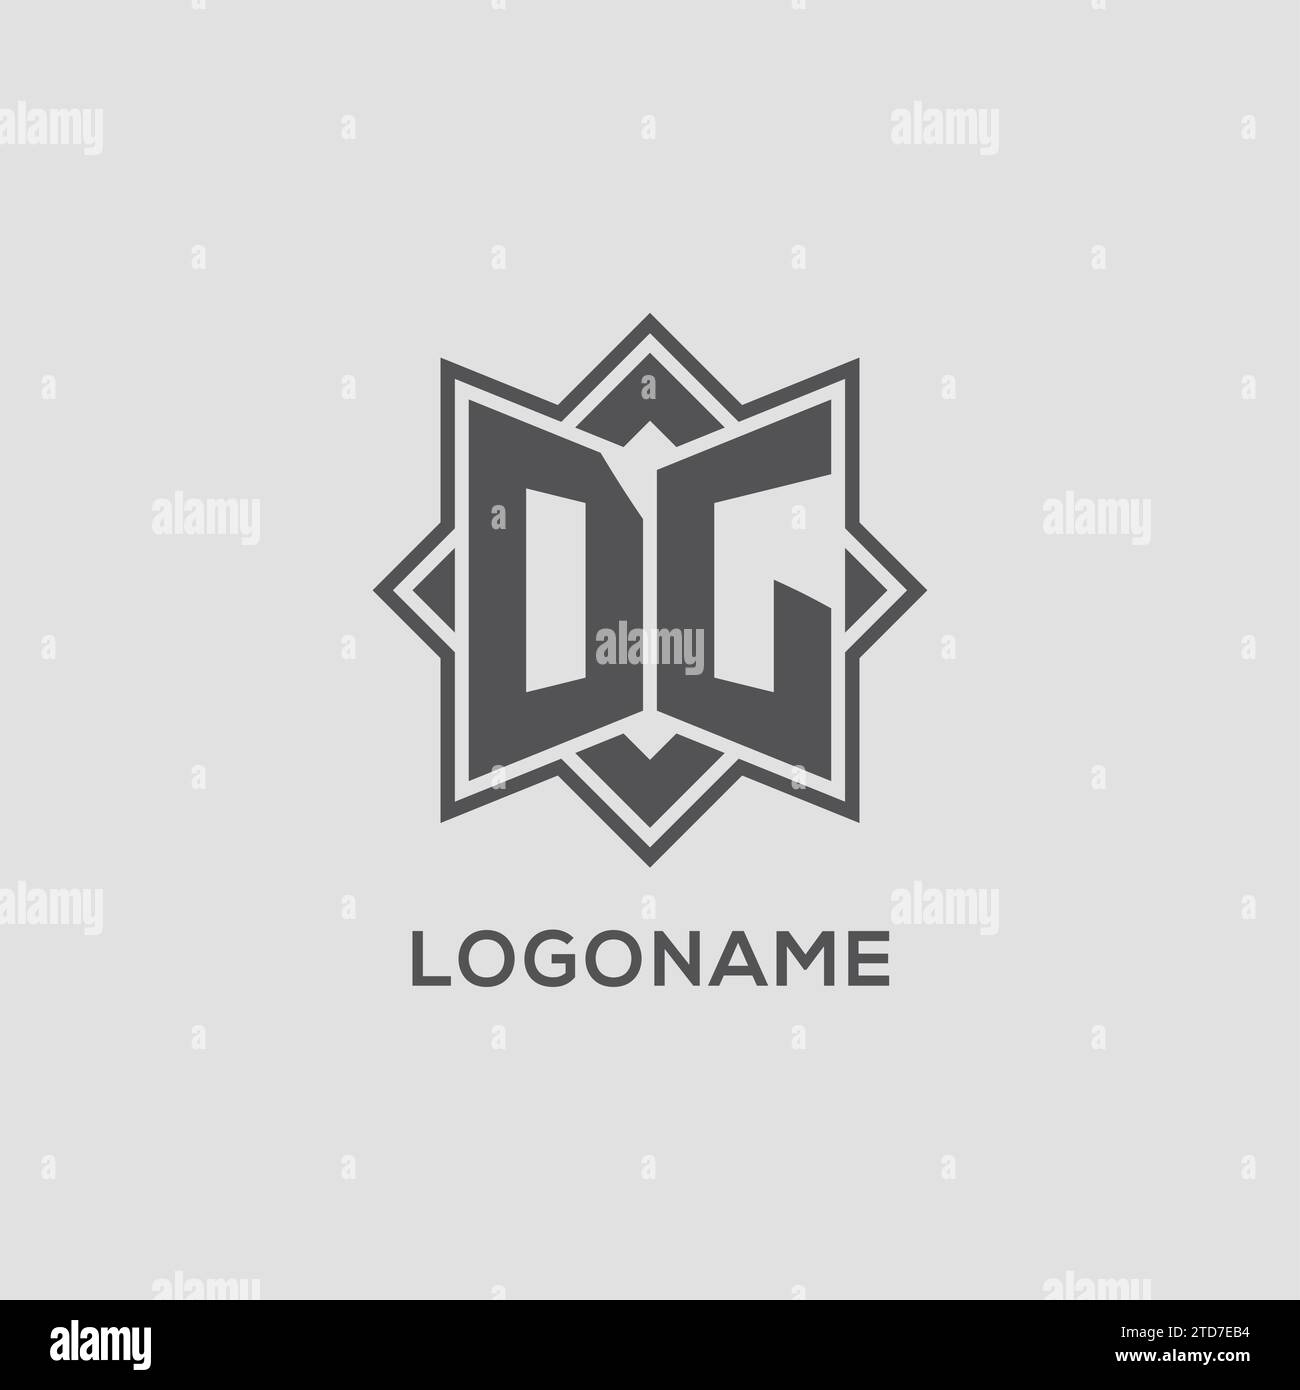 Monogram DG logo with eight point star style design vector graphic Stock Vector